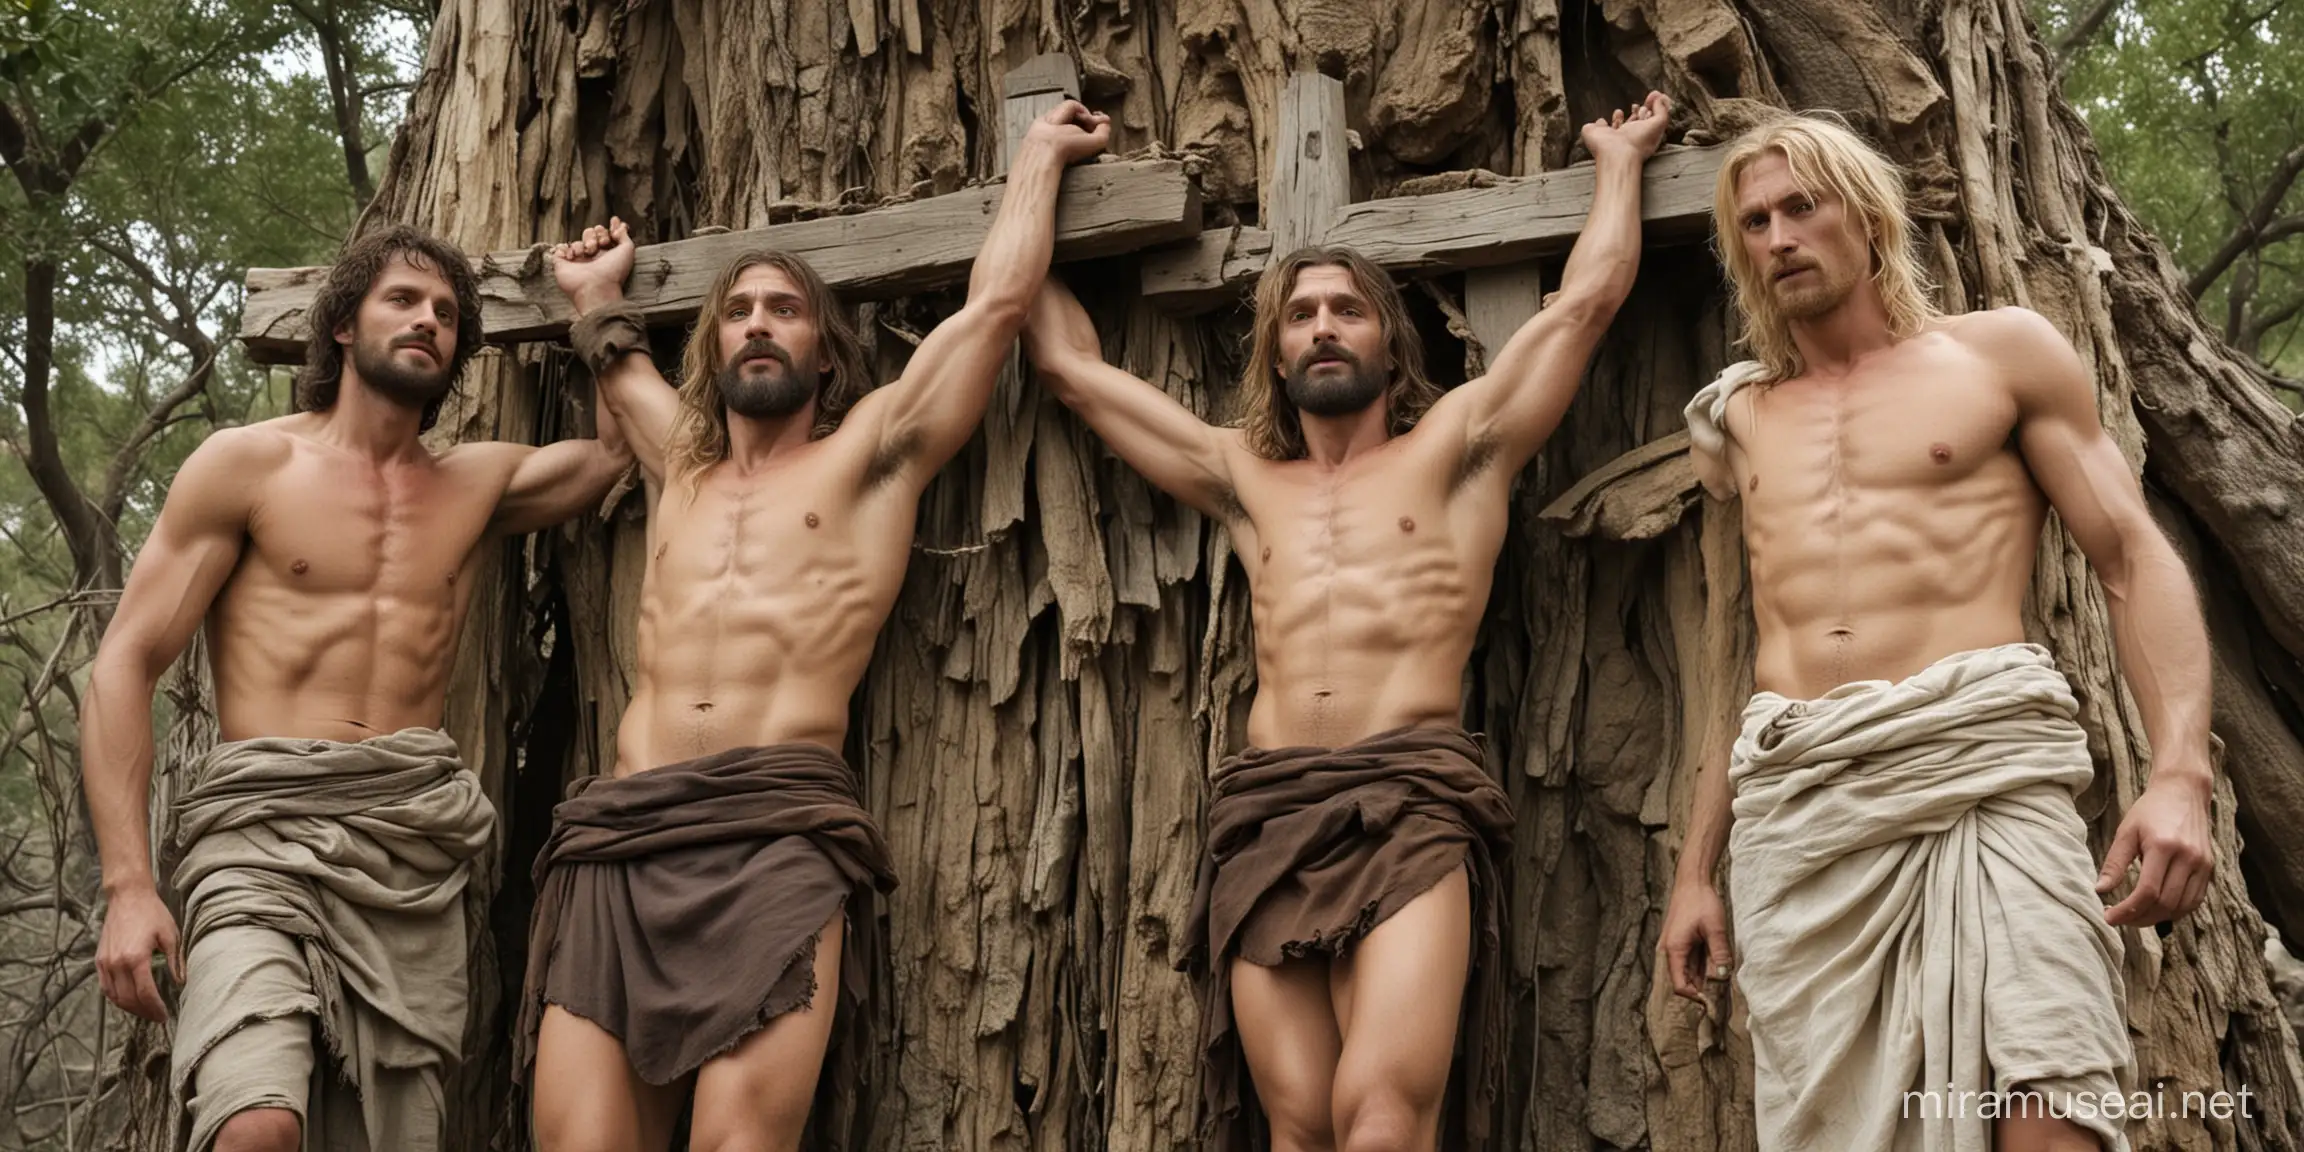 3 men are nailed to trees, the middle one is jesus, the 2 other men are the gestas and de dismas, gestas has blond hair and chesthair and wears a loincloth, dismas has dark hair has a hairy chest and wears a rugged cloth on his middle, it is 40 degrees Celsius, the place is Golgotha, the 3 crosses are complete shown on the picture